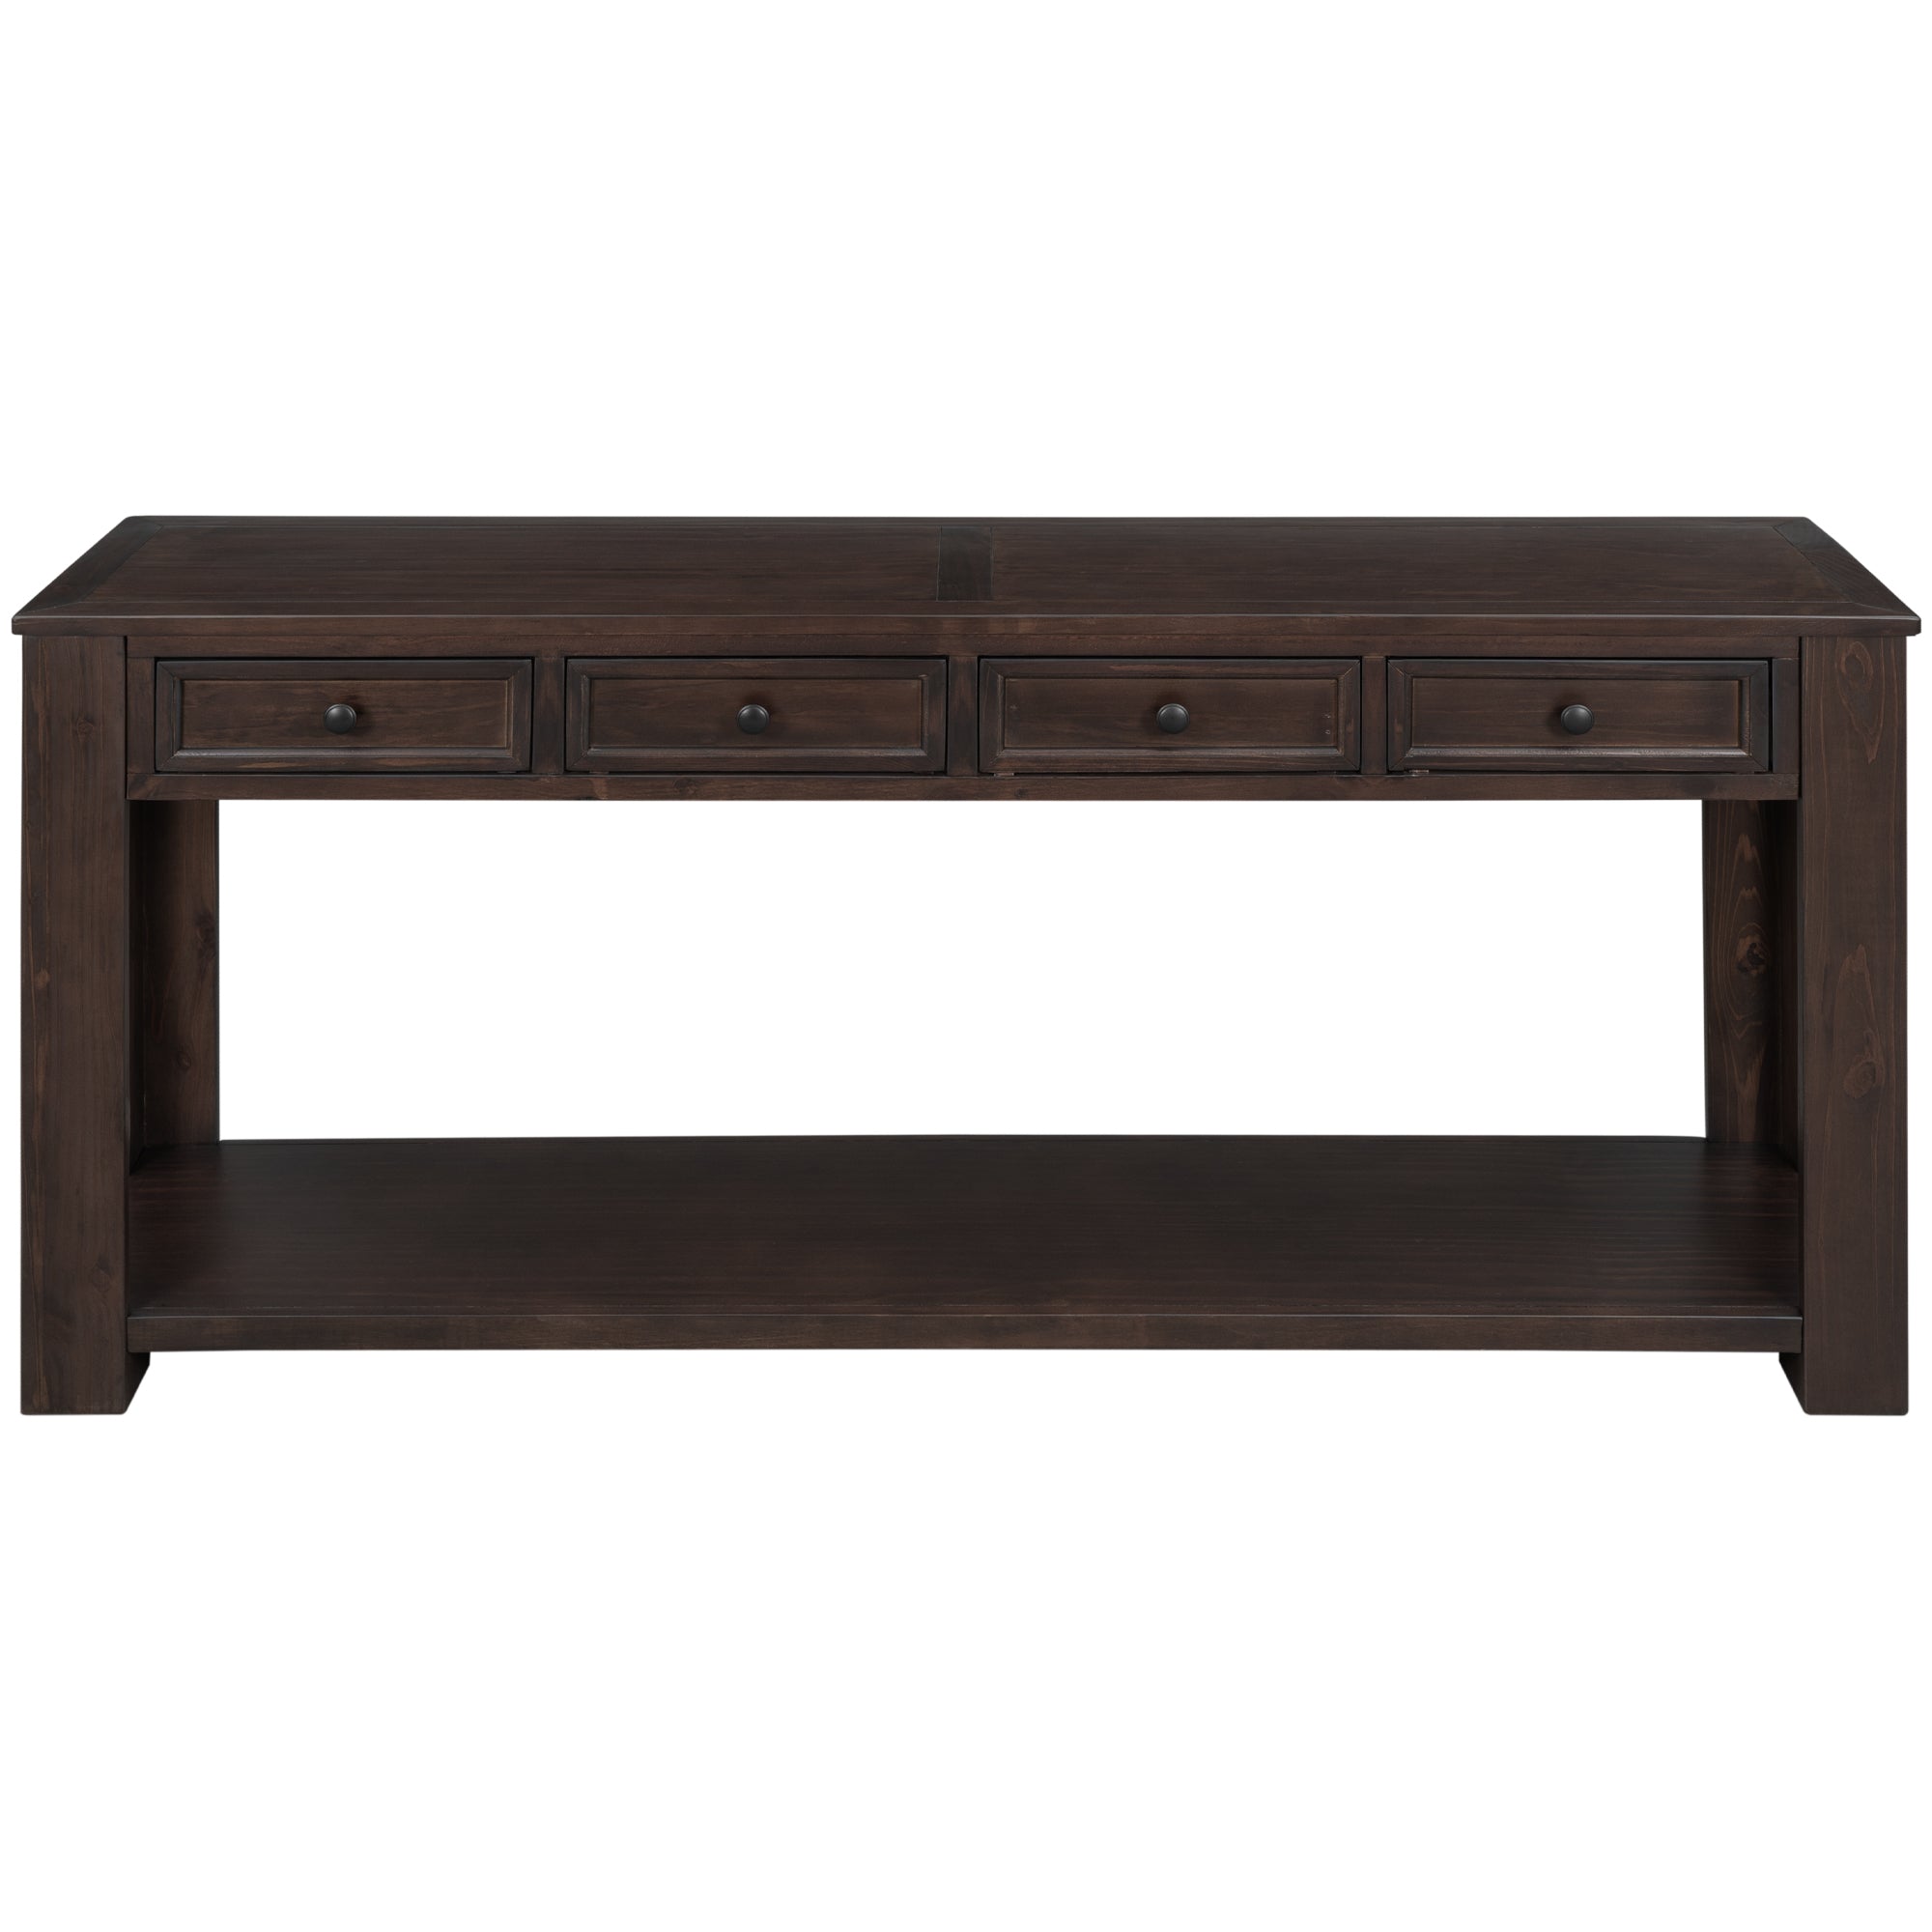 Console Table for Entryway Hallway Sofa Table with Storage Drawers and Bottom Shelf-Boyel Living